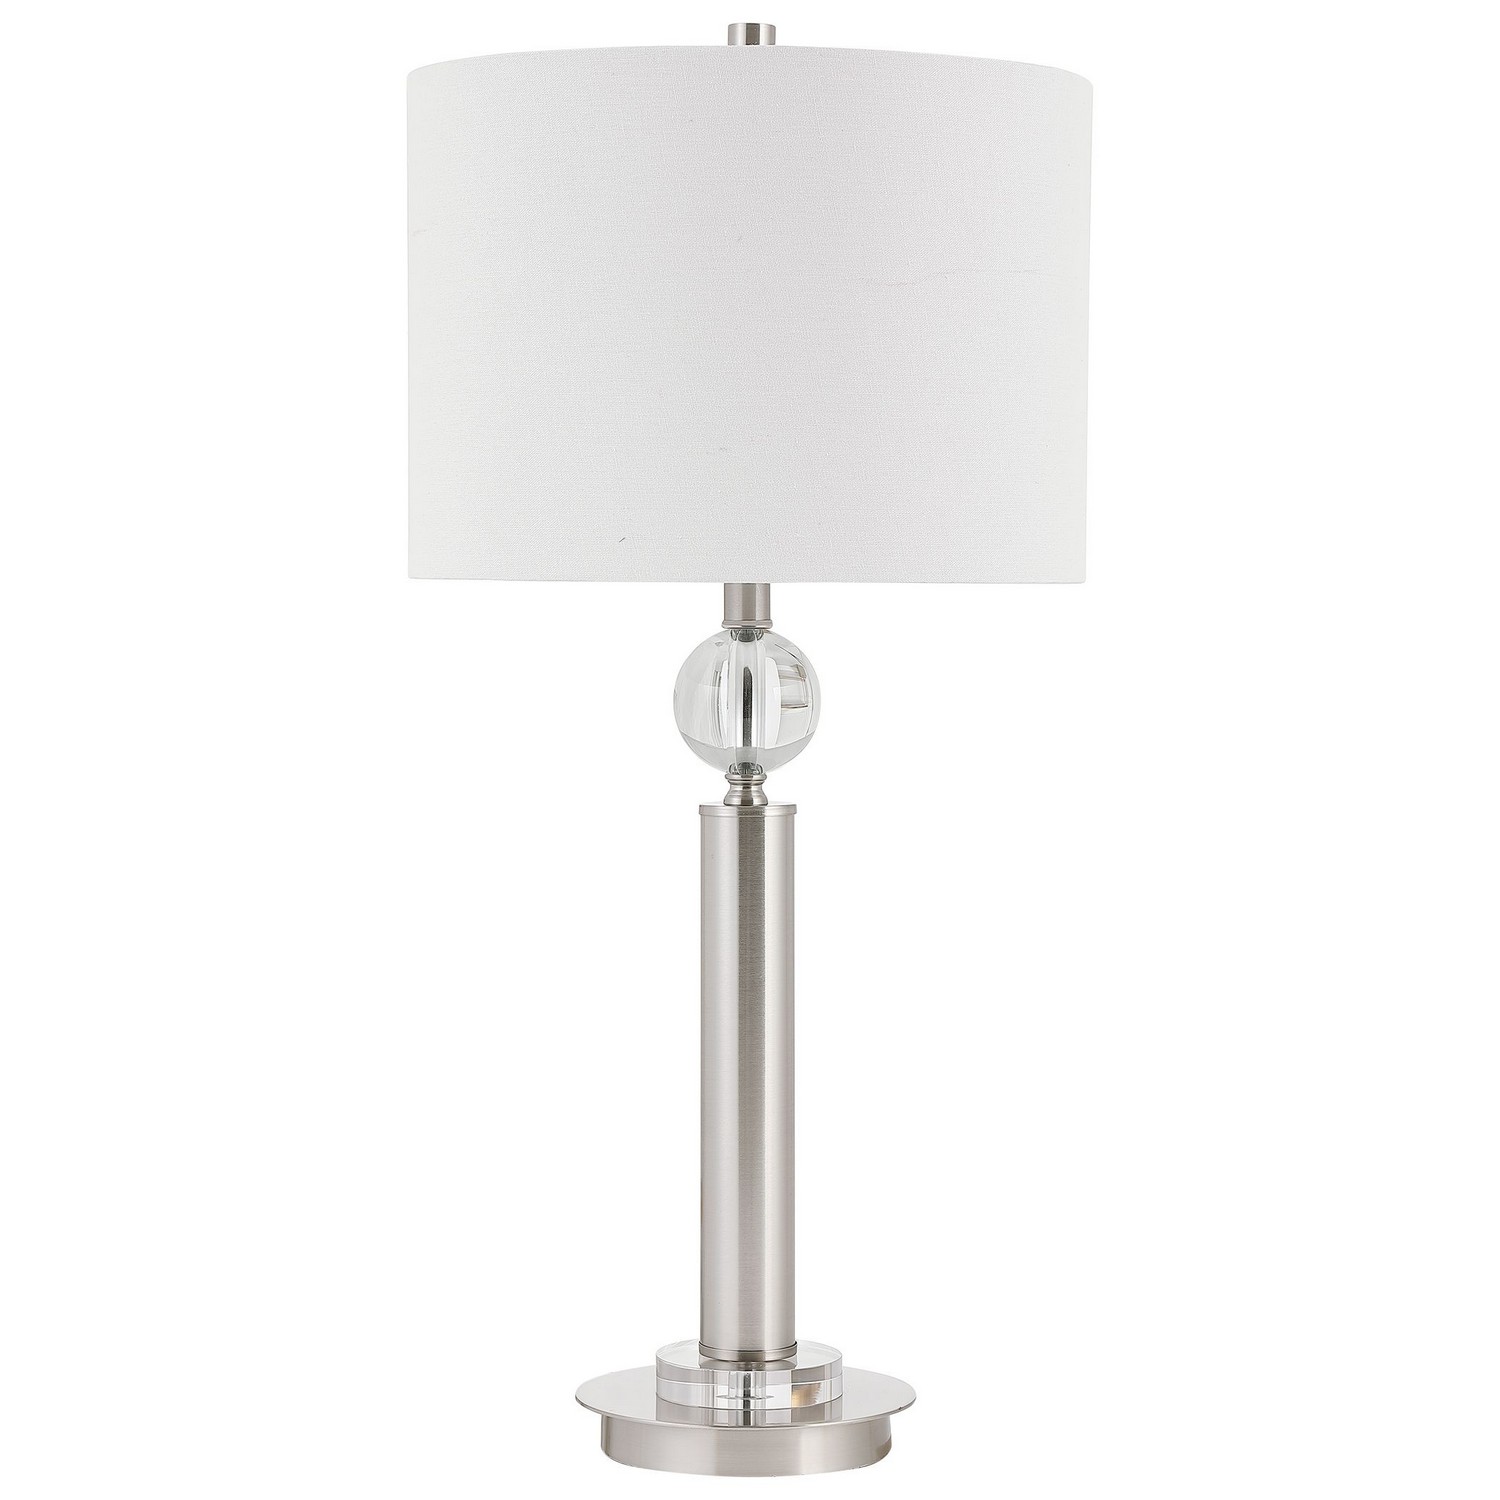 Uttermost W26078-1 Table Lamp - Brushed Nickel